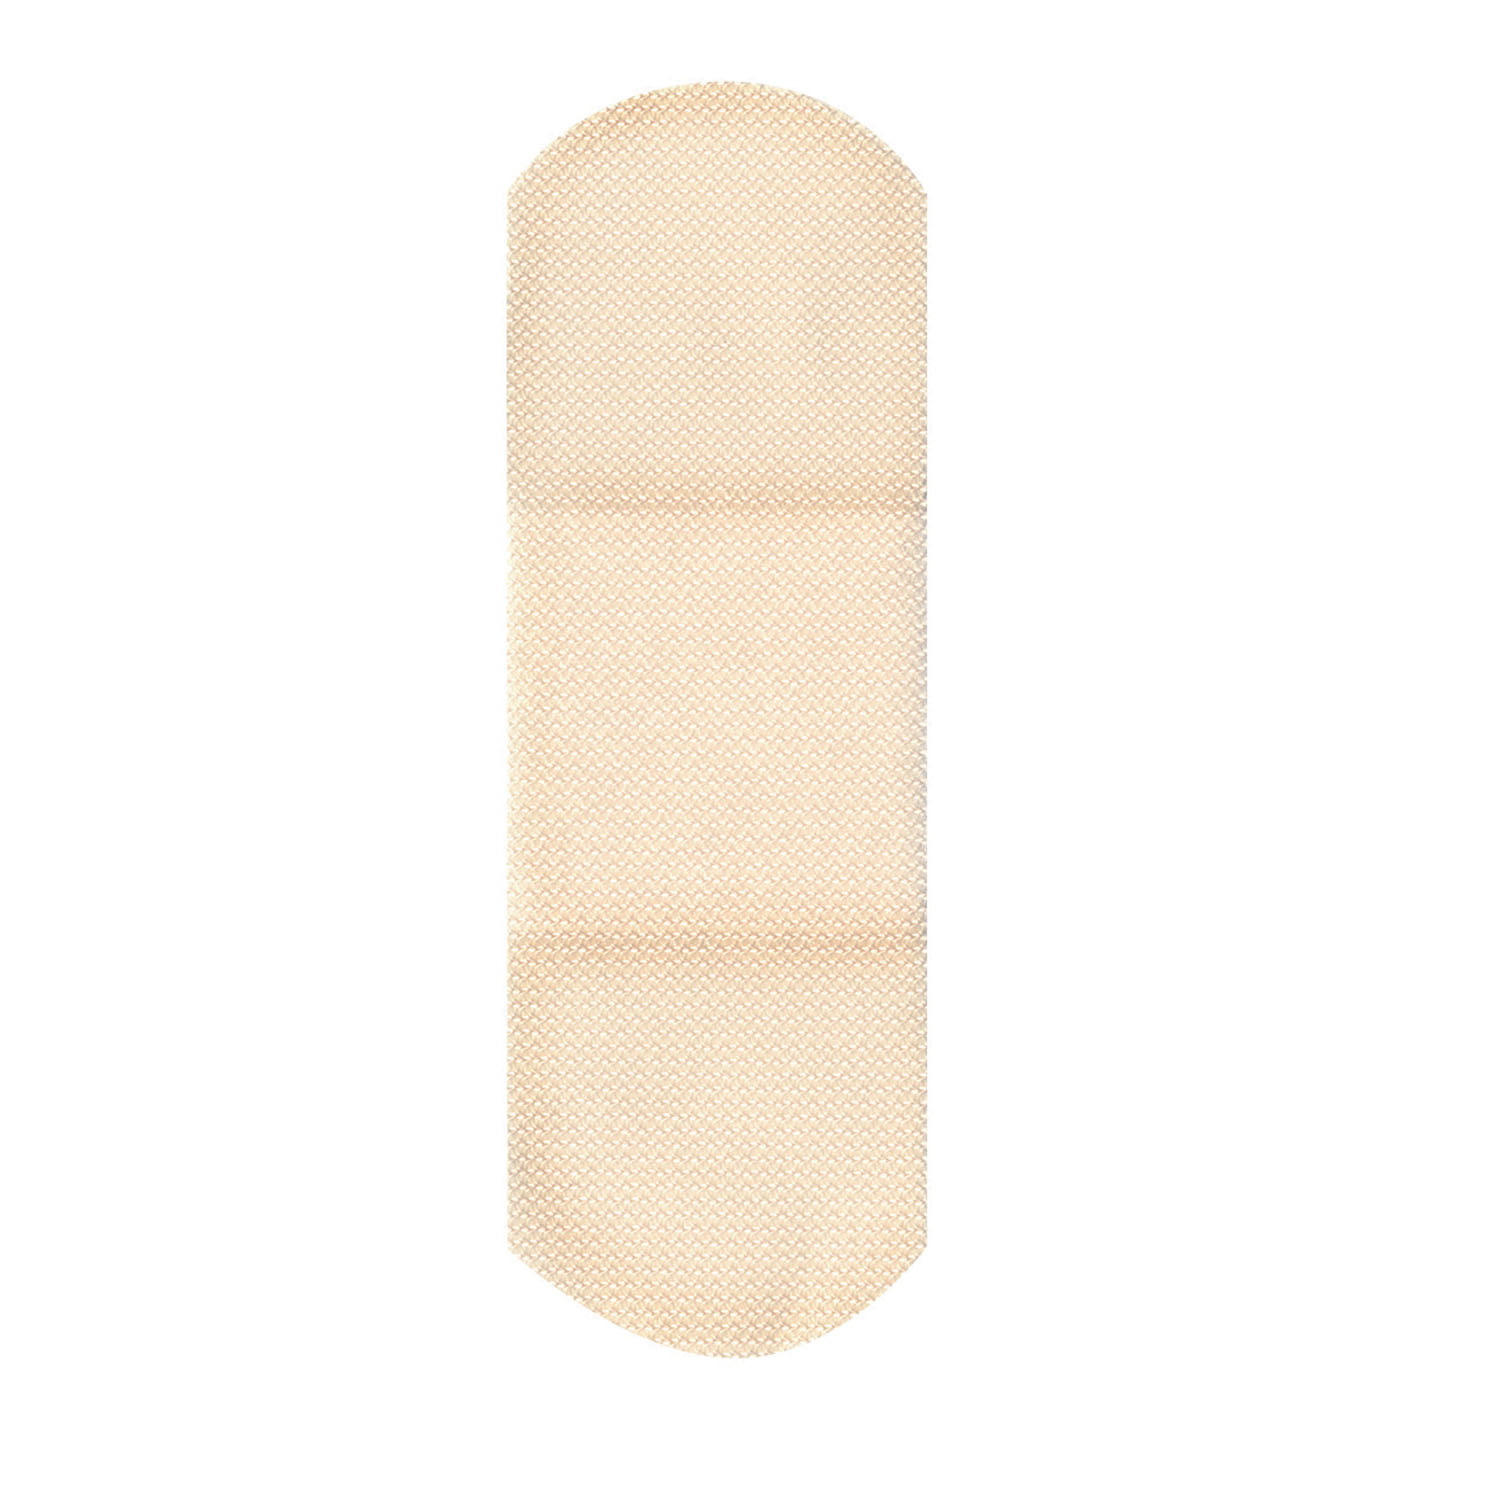 DUKAL FIRST AID ADHESIVE BANDAGES : 1790033 BX $3.52 Stocked